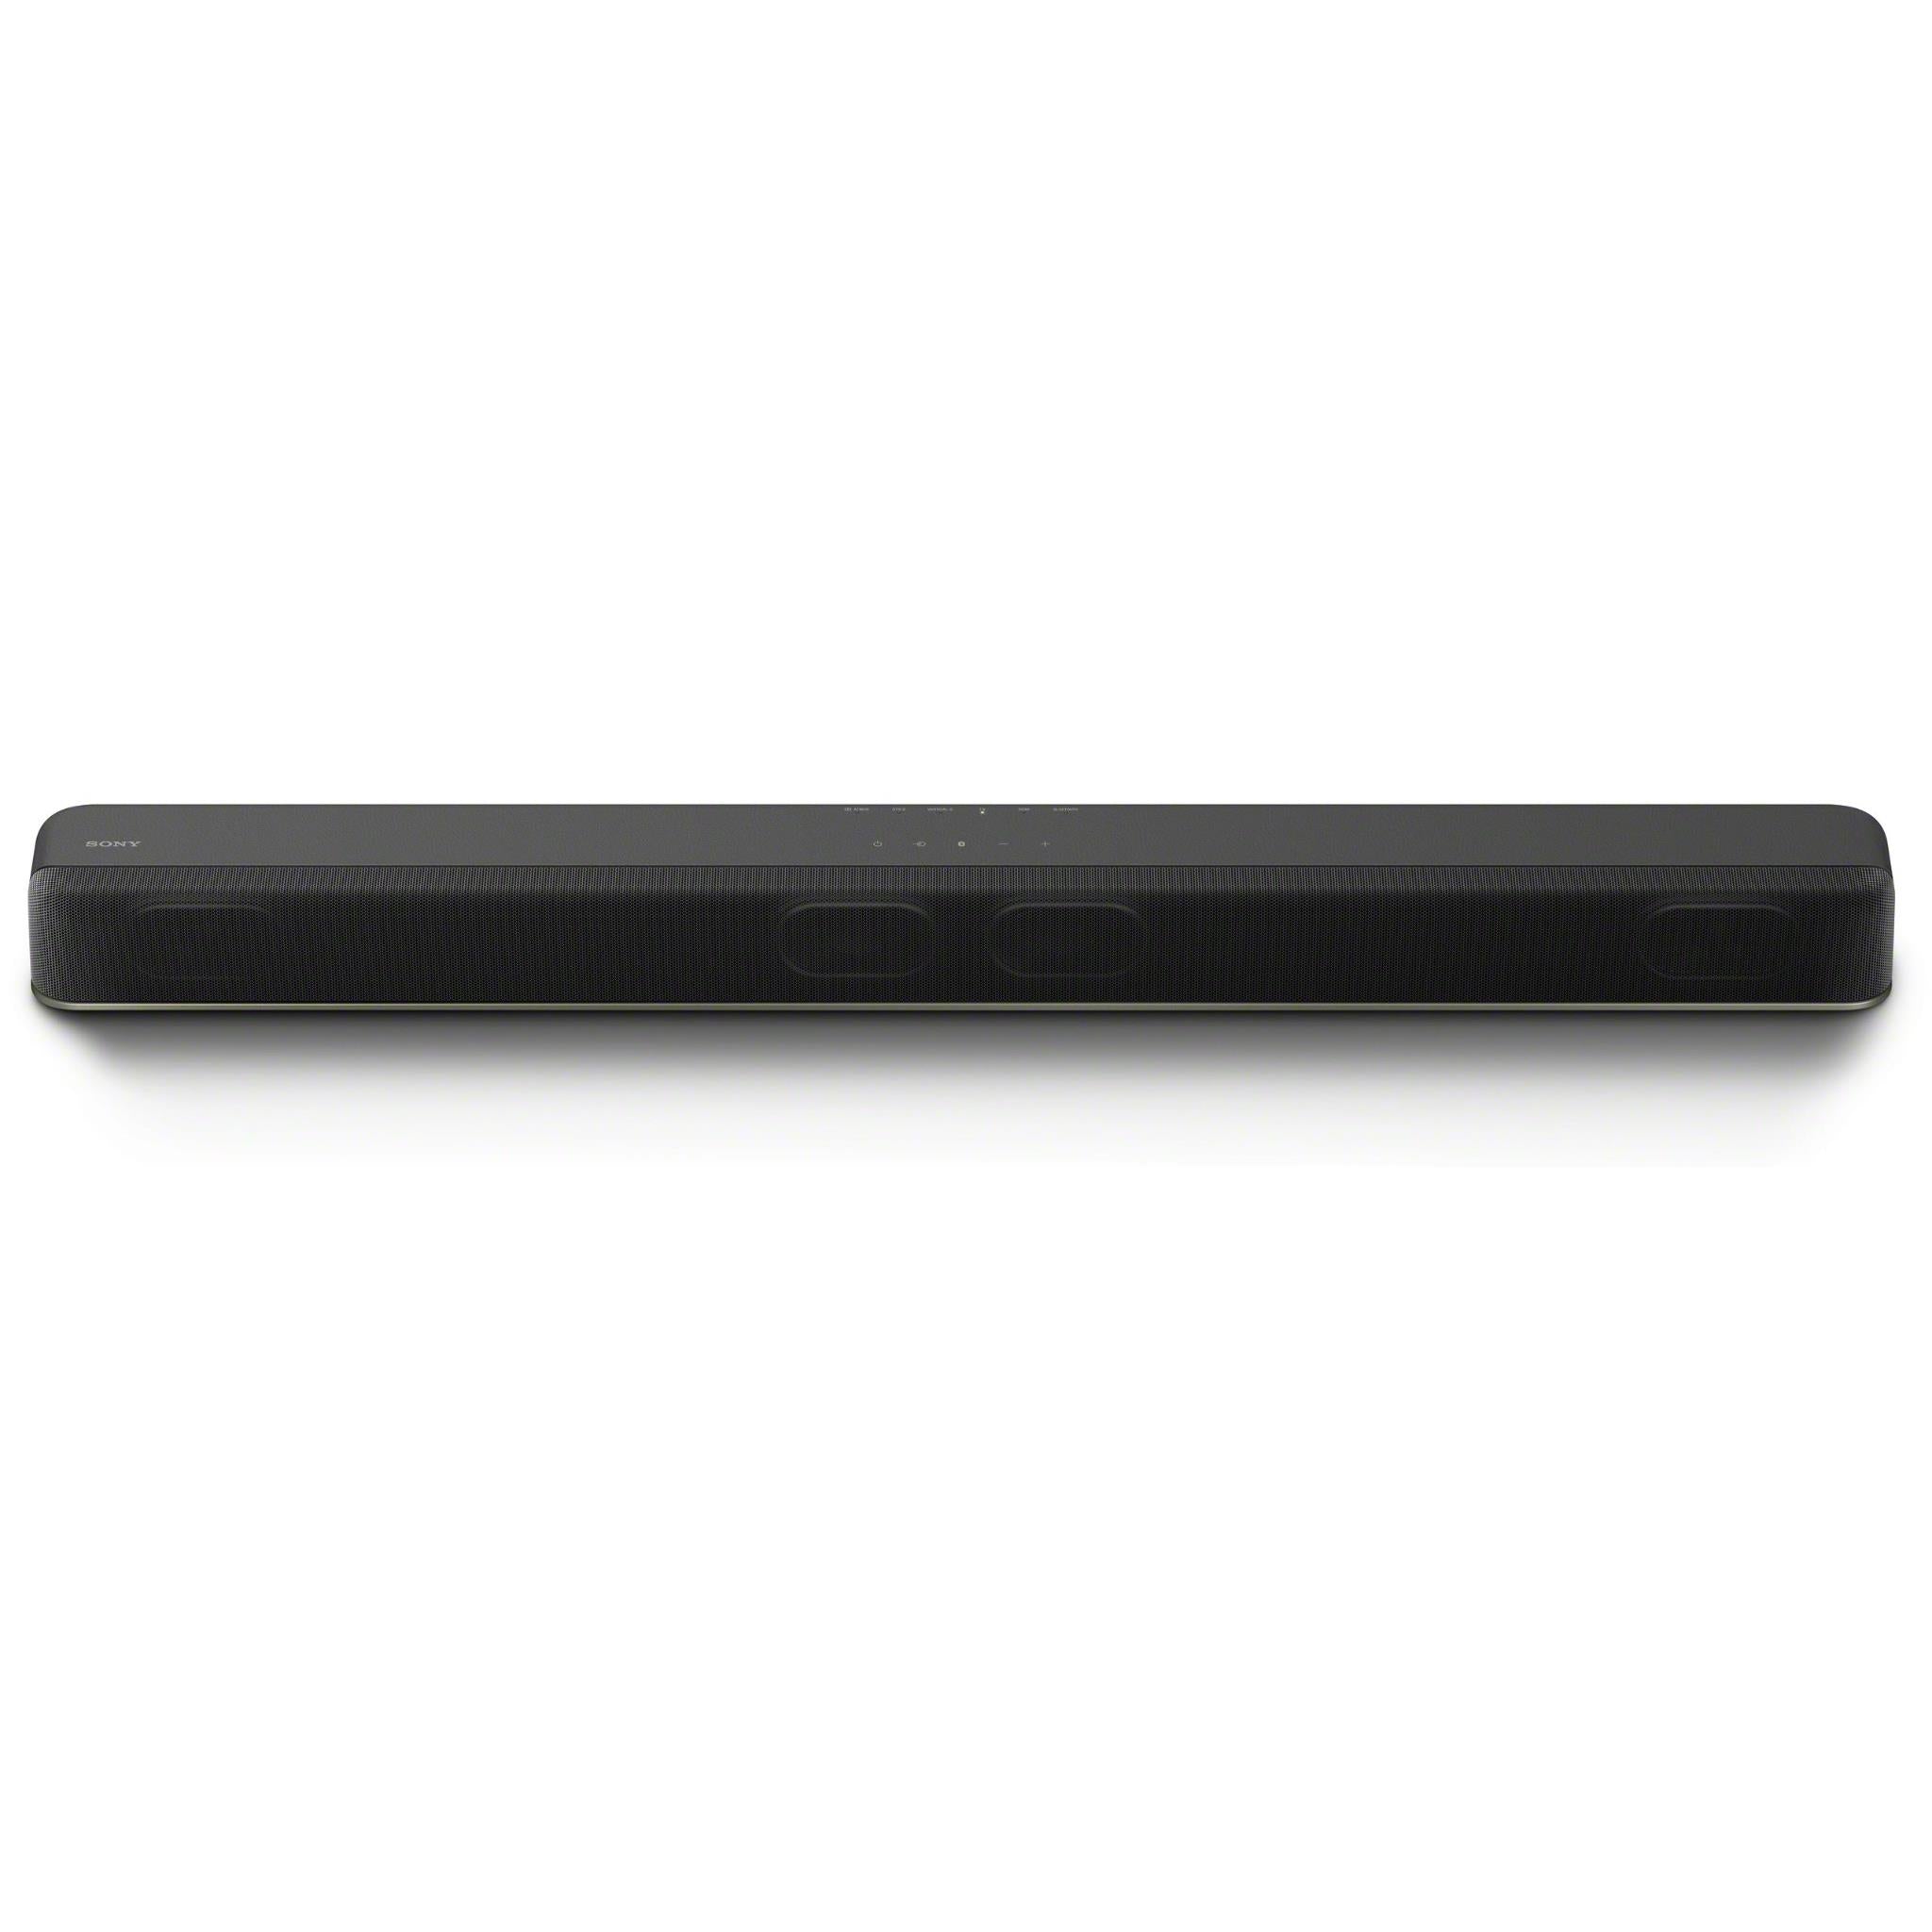 sony ht-x8500 2.1ch all-in-1 dolby atmos soundbar with built-in subwoofer